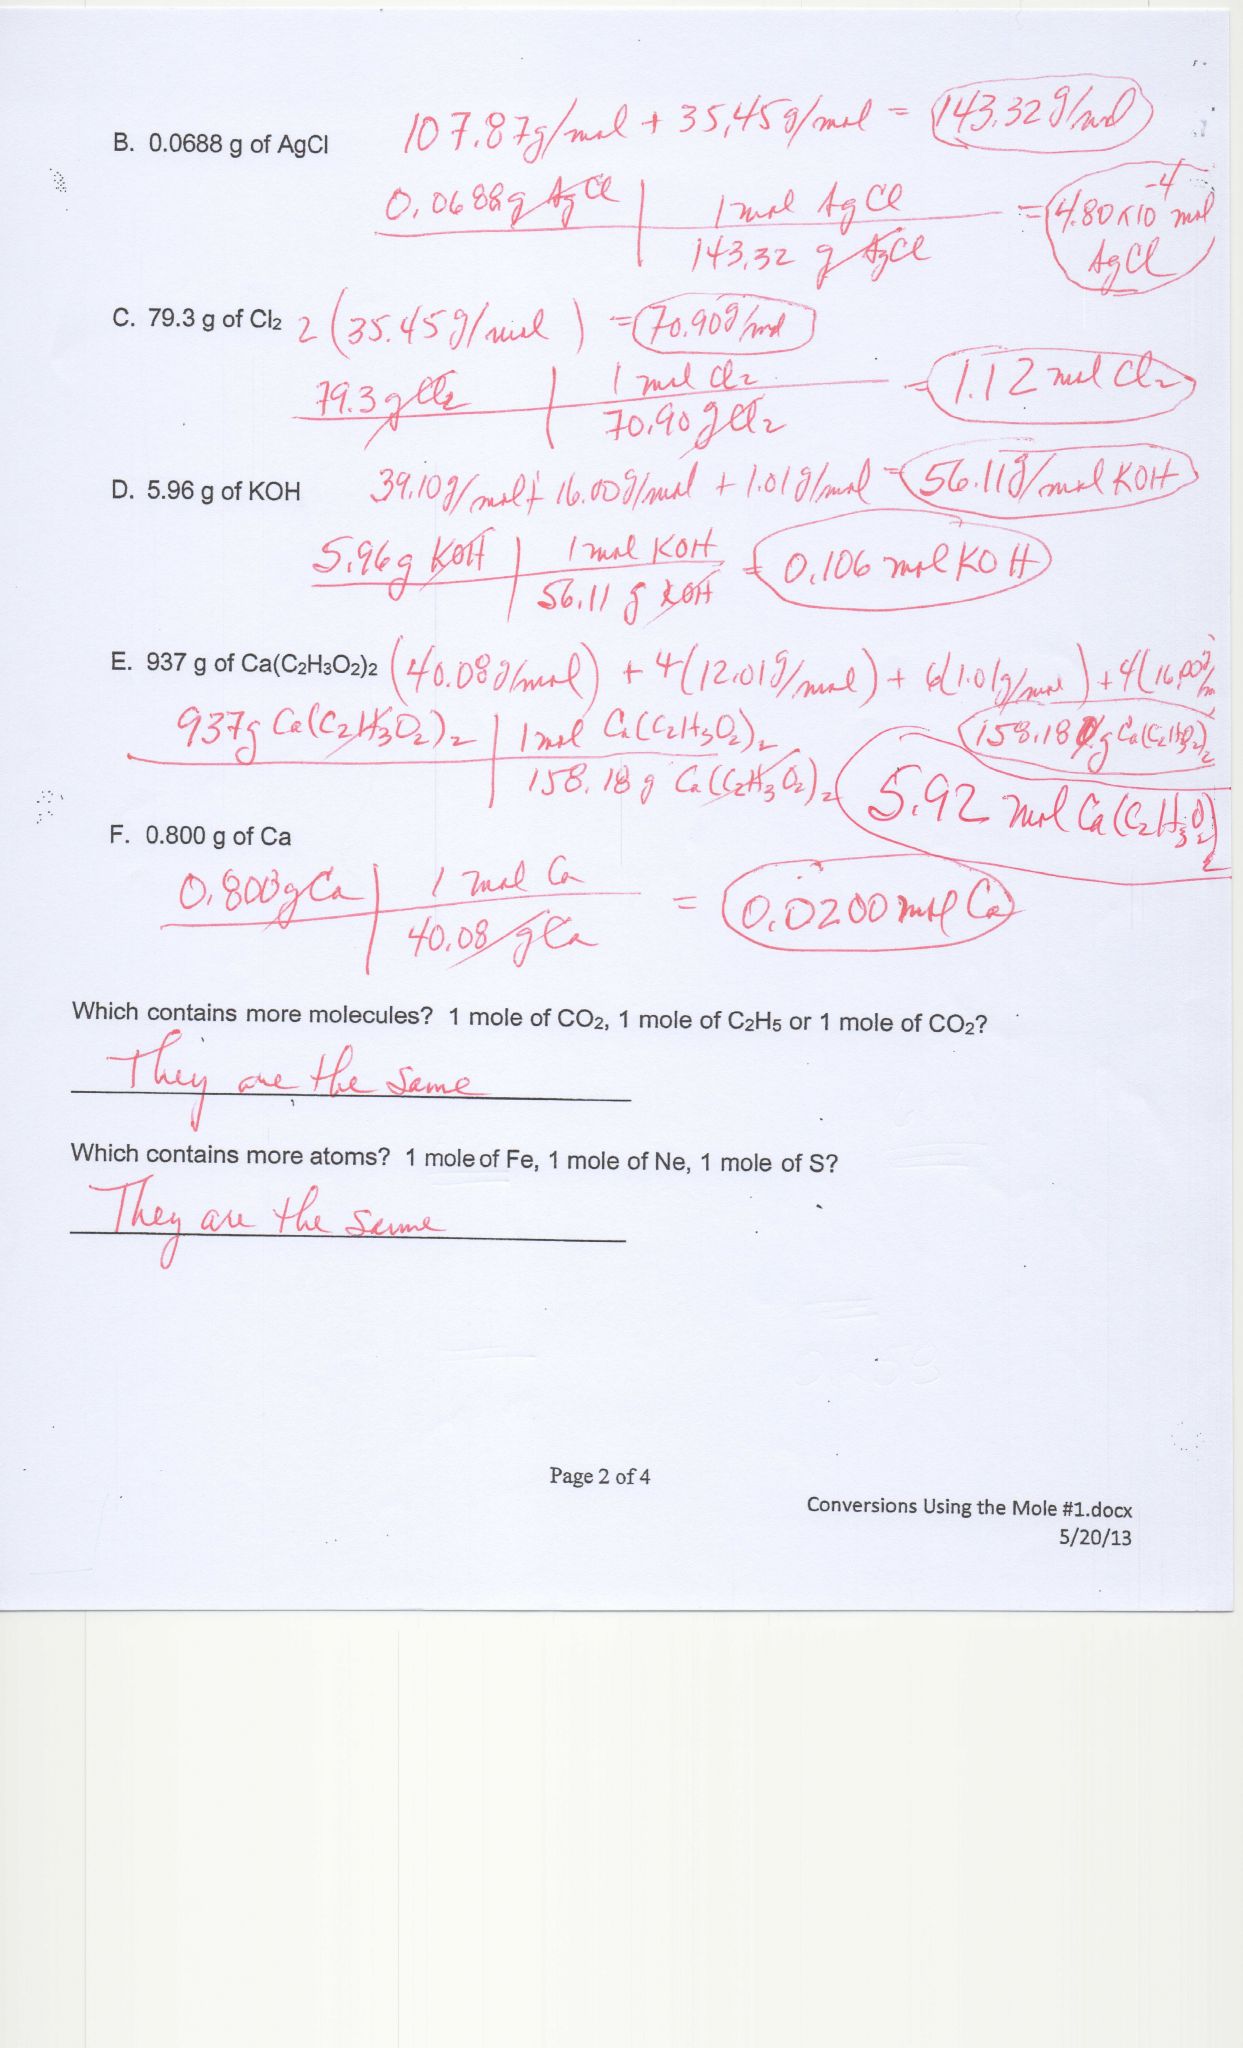 Worksheet Labeling Waves Answer Key Page 2 as Well as Lutz George Chemistry 1 Academic Documents